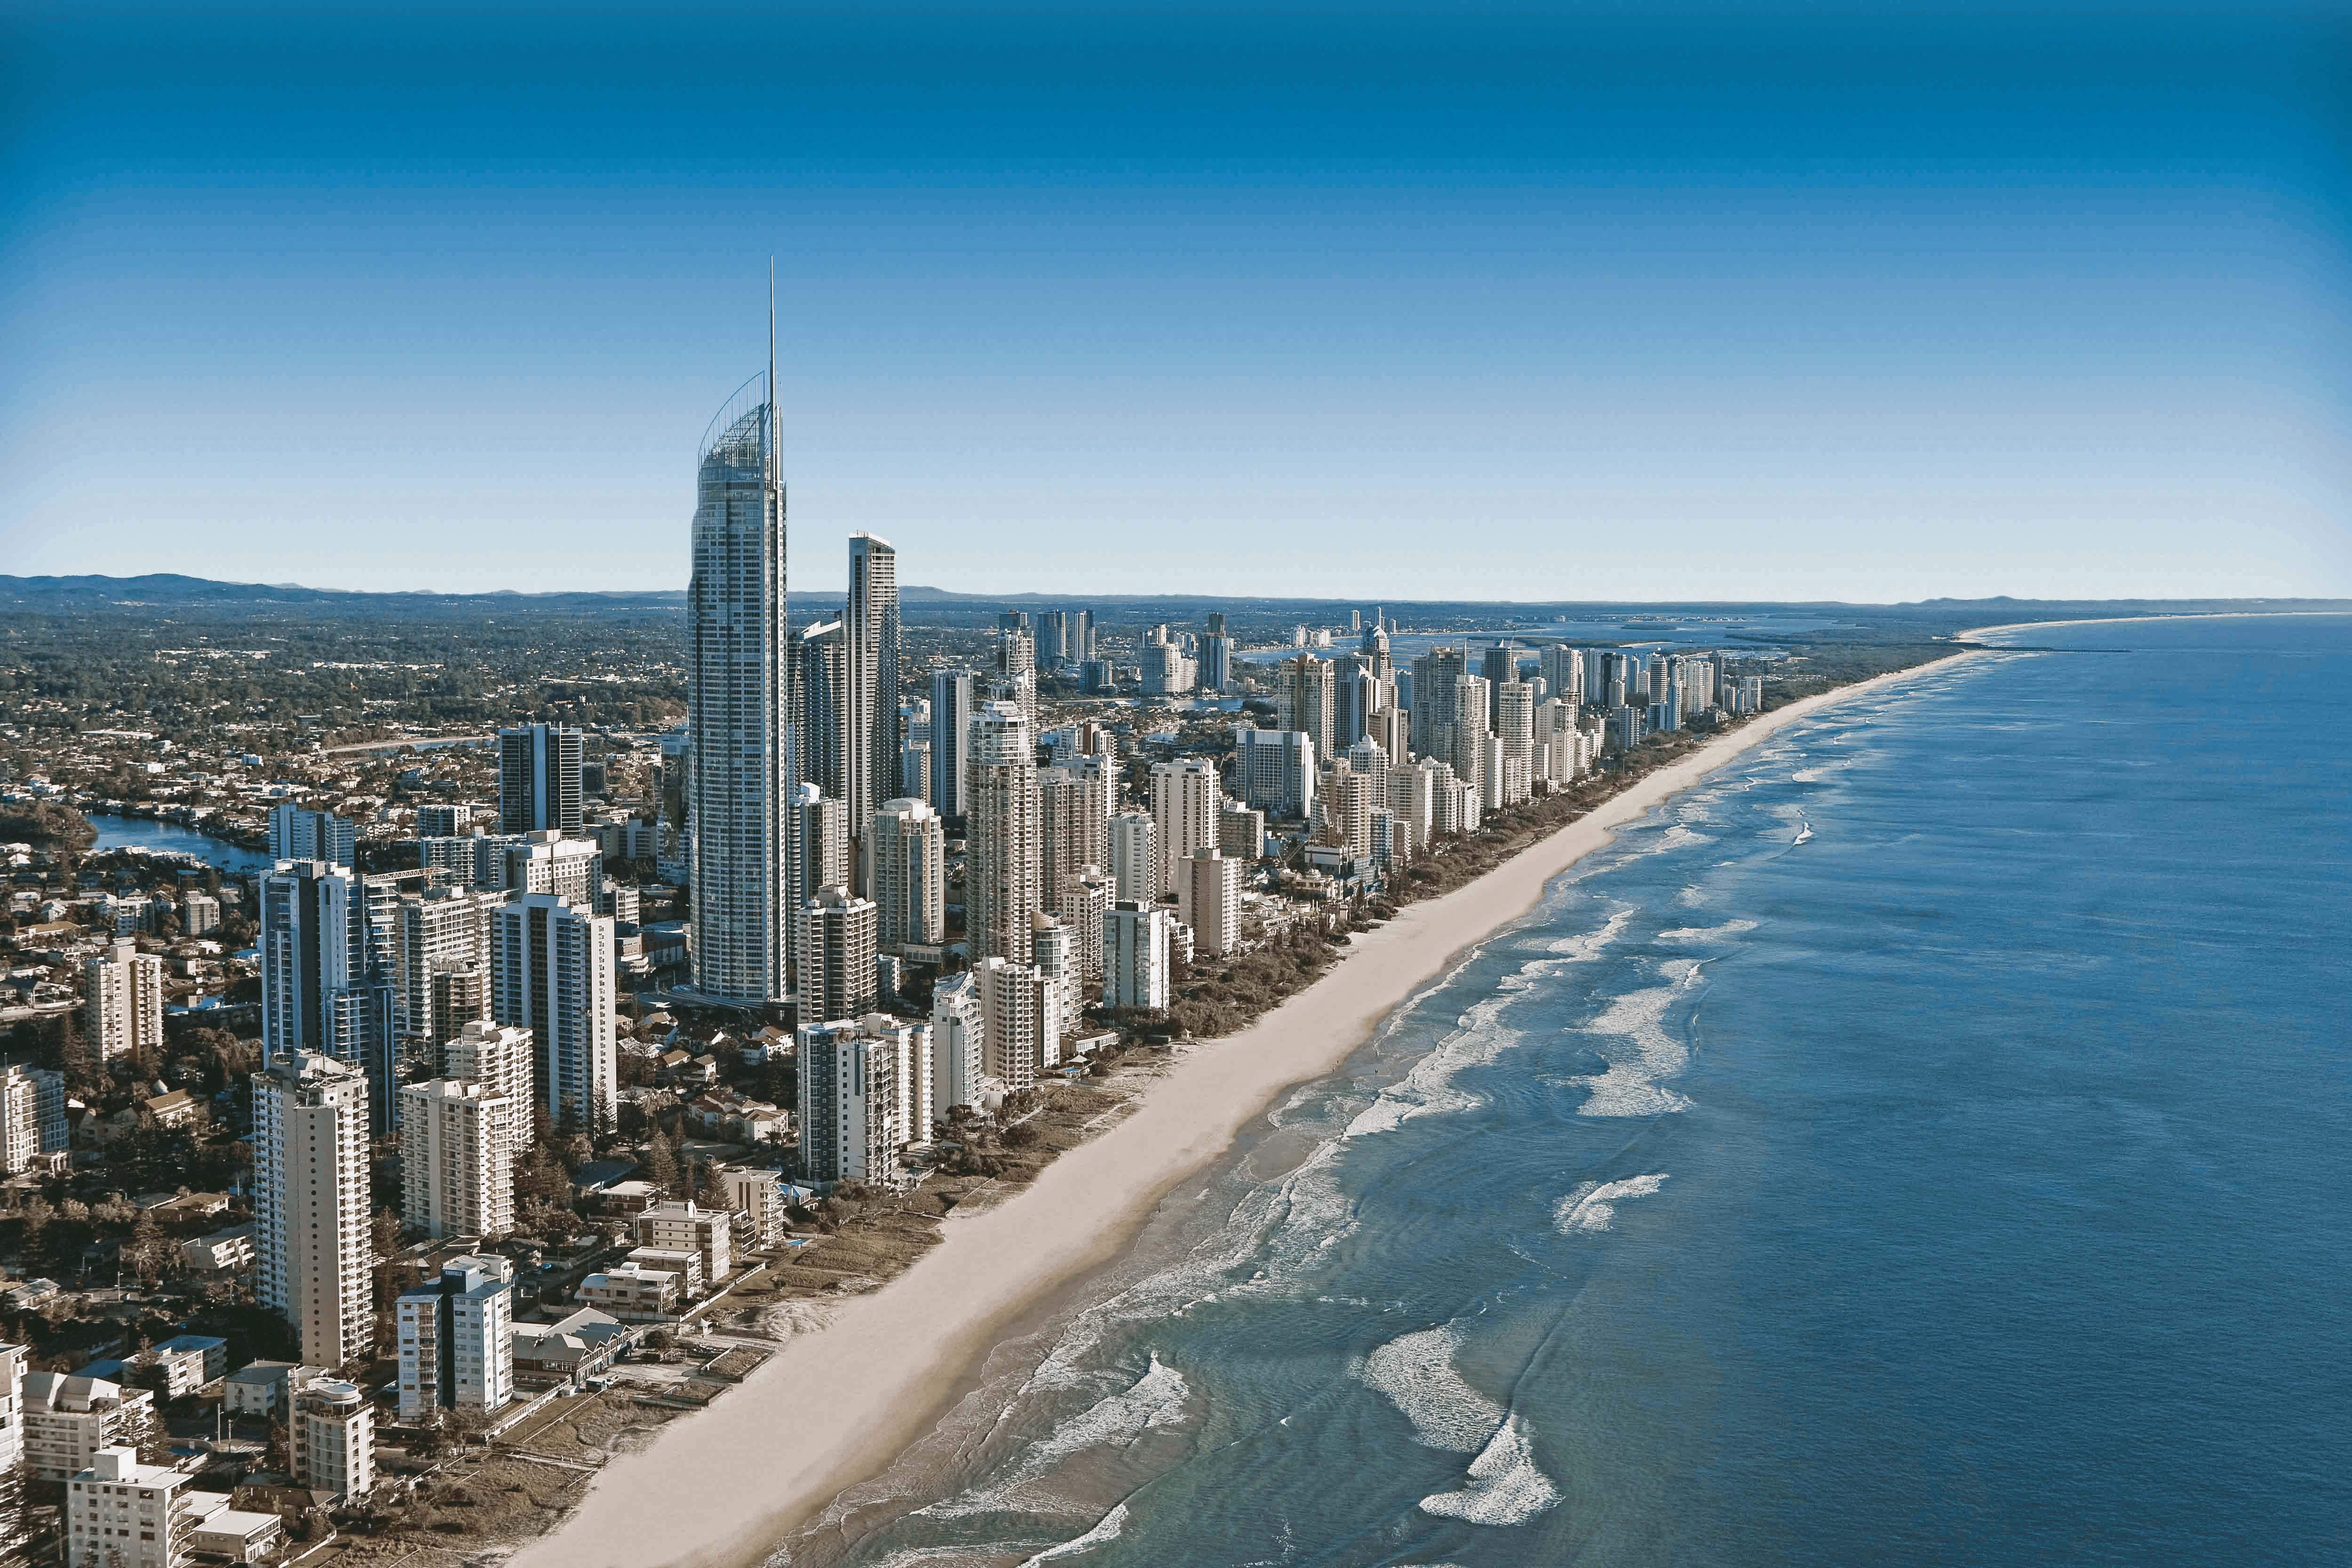 Top Hotels in Surfers Paradise, Gold Coast - Cancel FREE on most